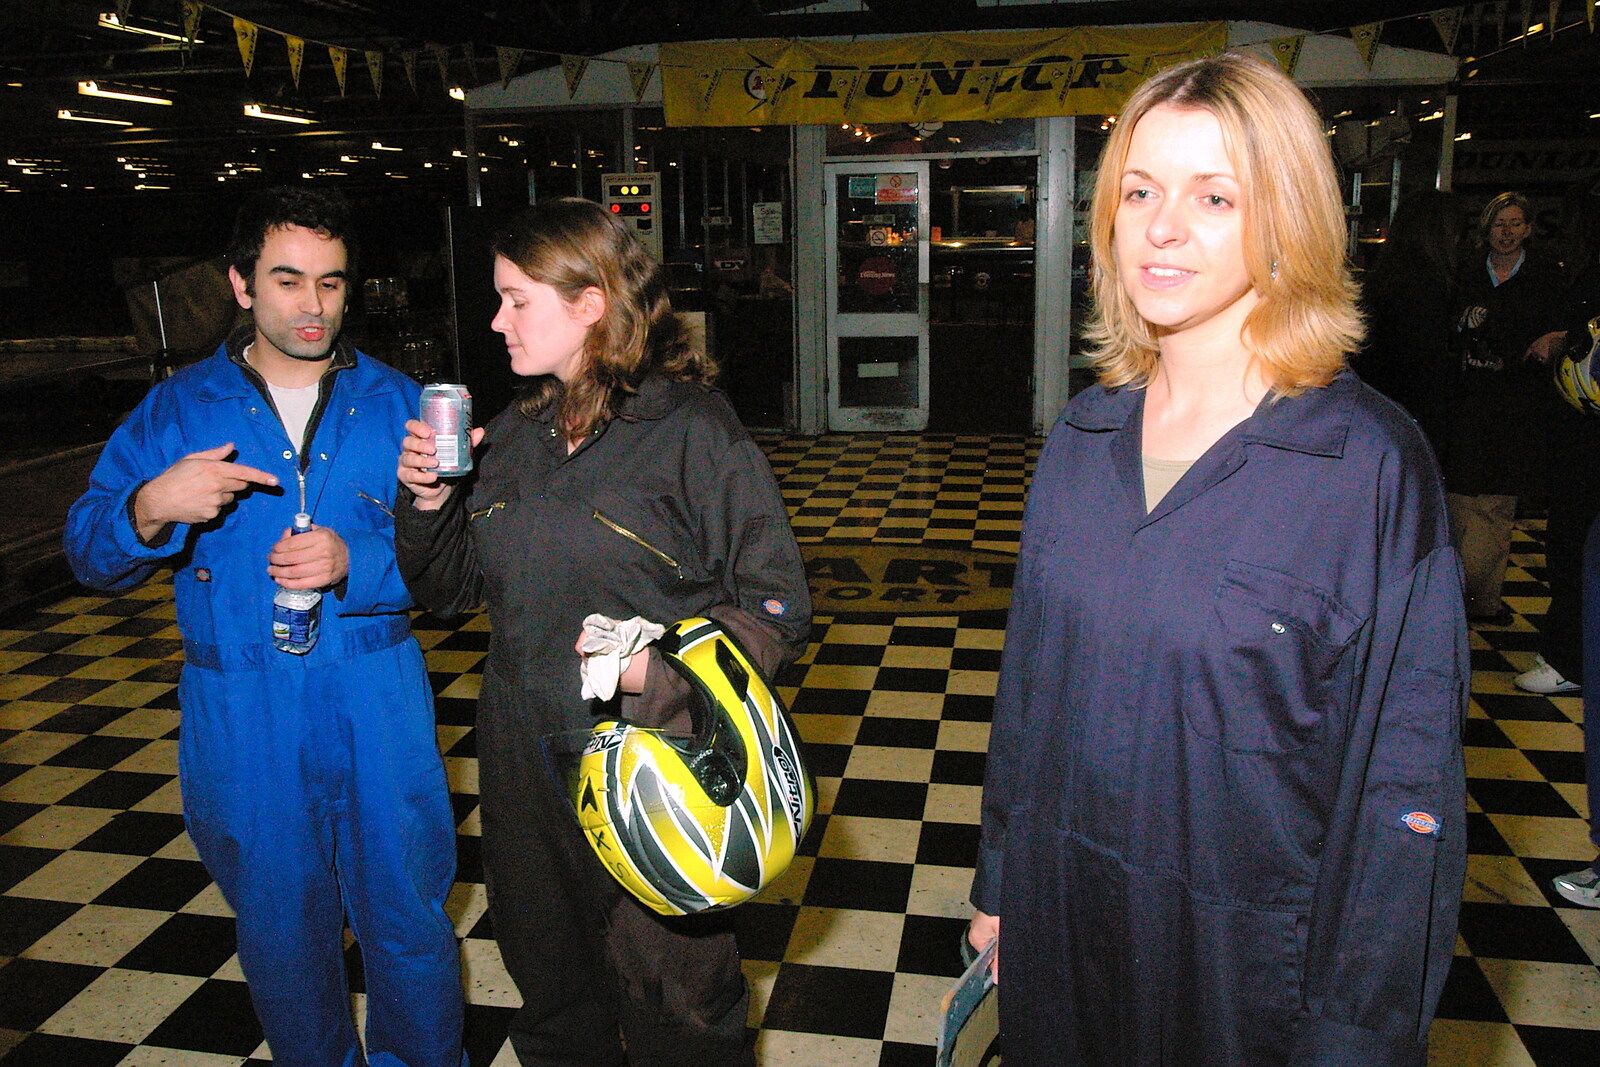 Janet looks wistful from Qualcomm goes Karting in Caxton, Cambridgeshire - 7th November 2005